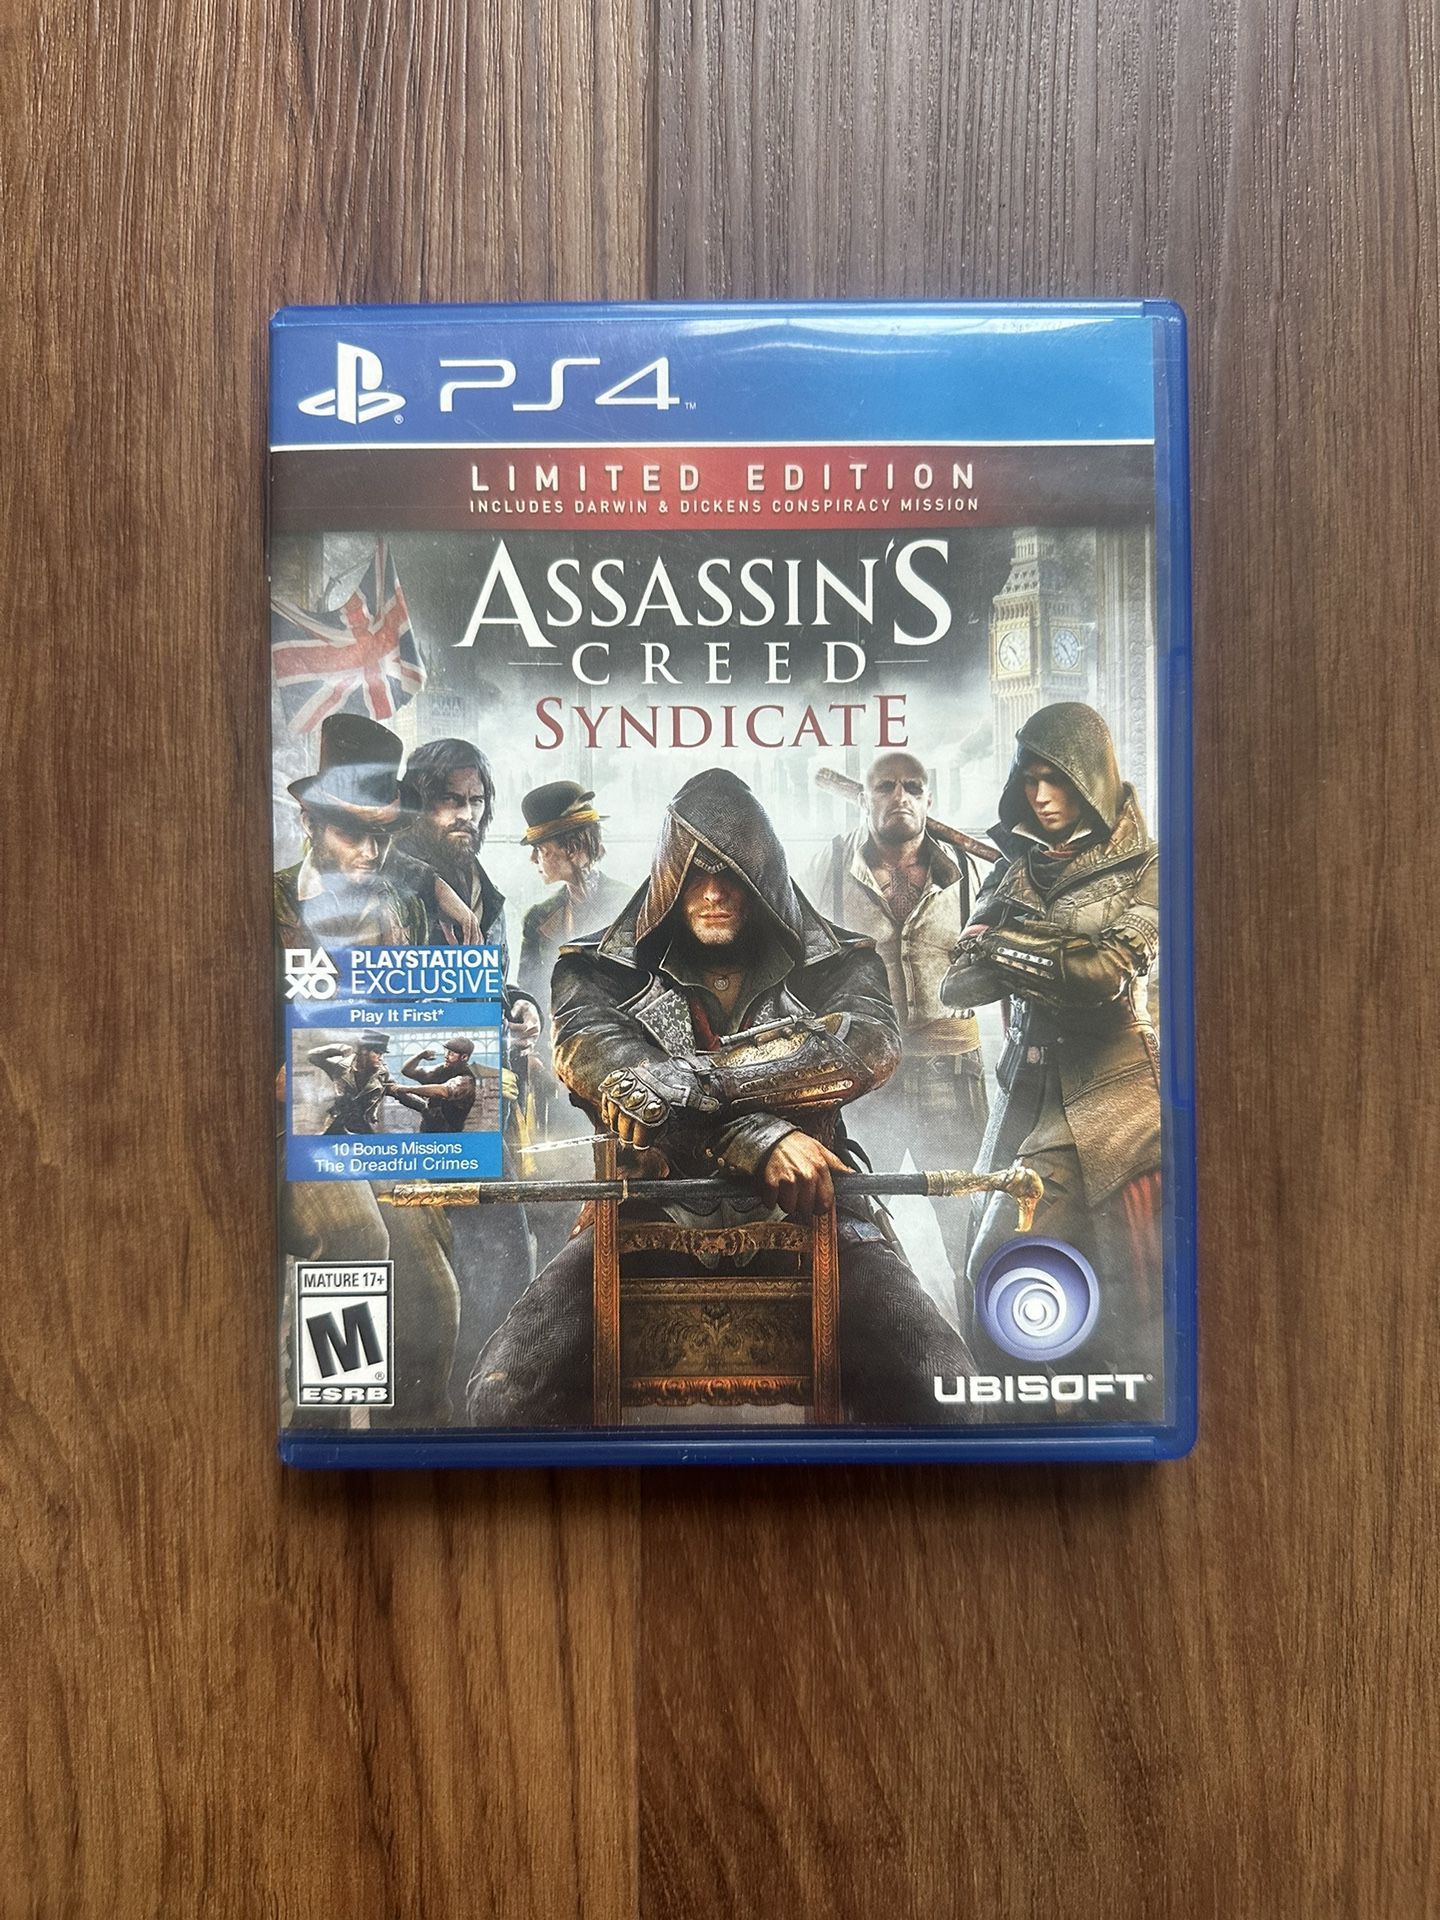 Limited Edition Assassin’s Creed Syndicate - PS4